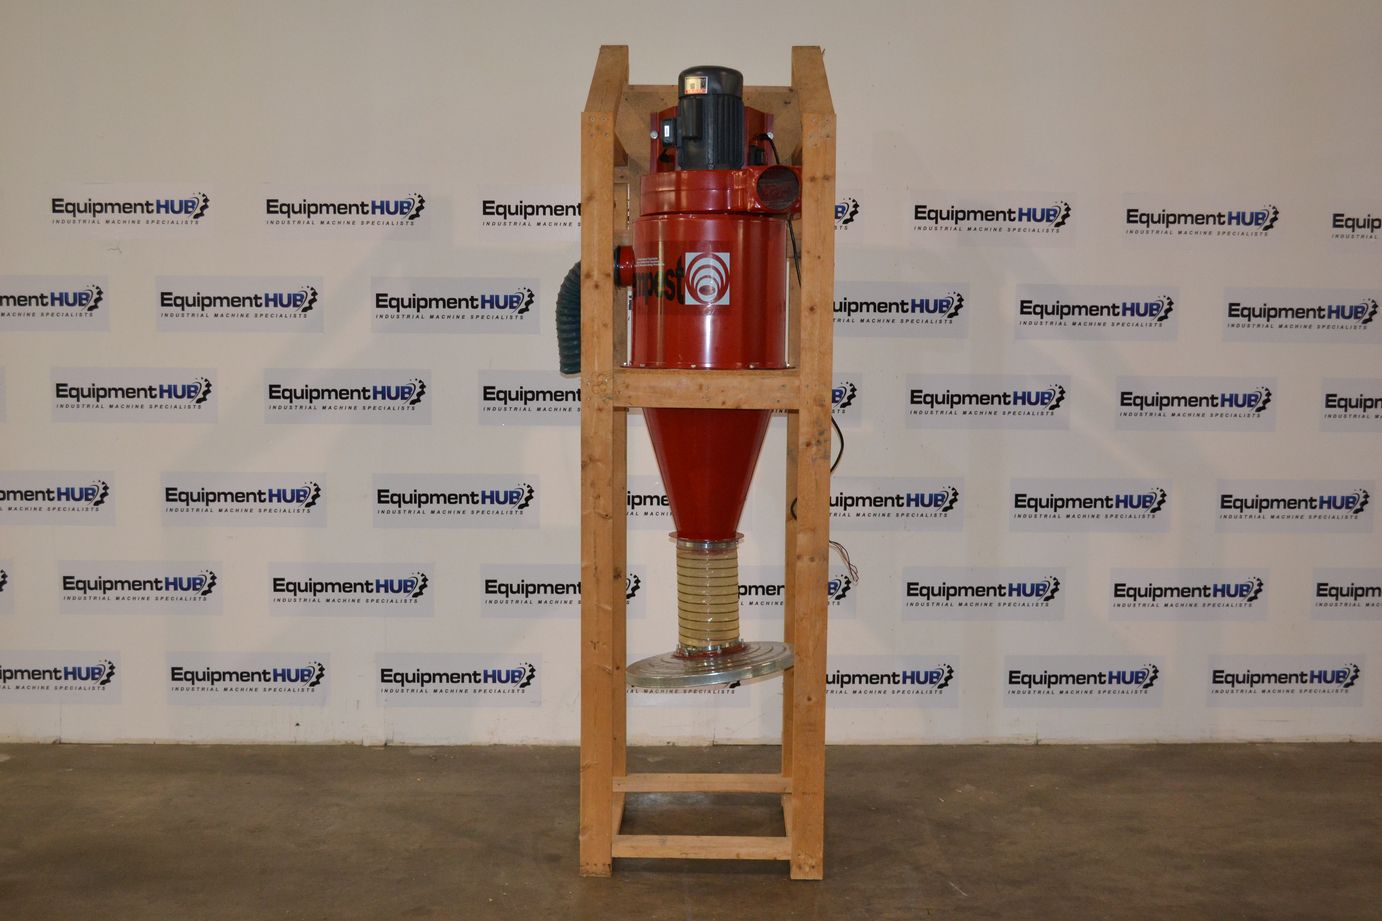 PSI Woodworking / Pennstate Tempest S-Series 3HP14" Cyclone Dust Collector